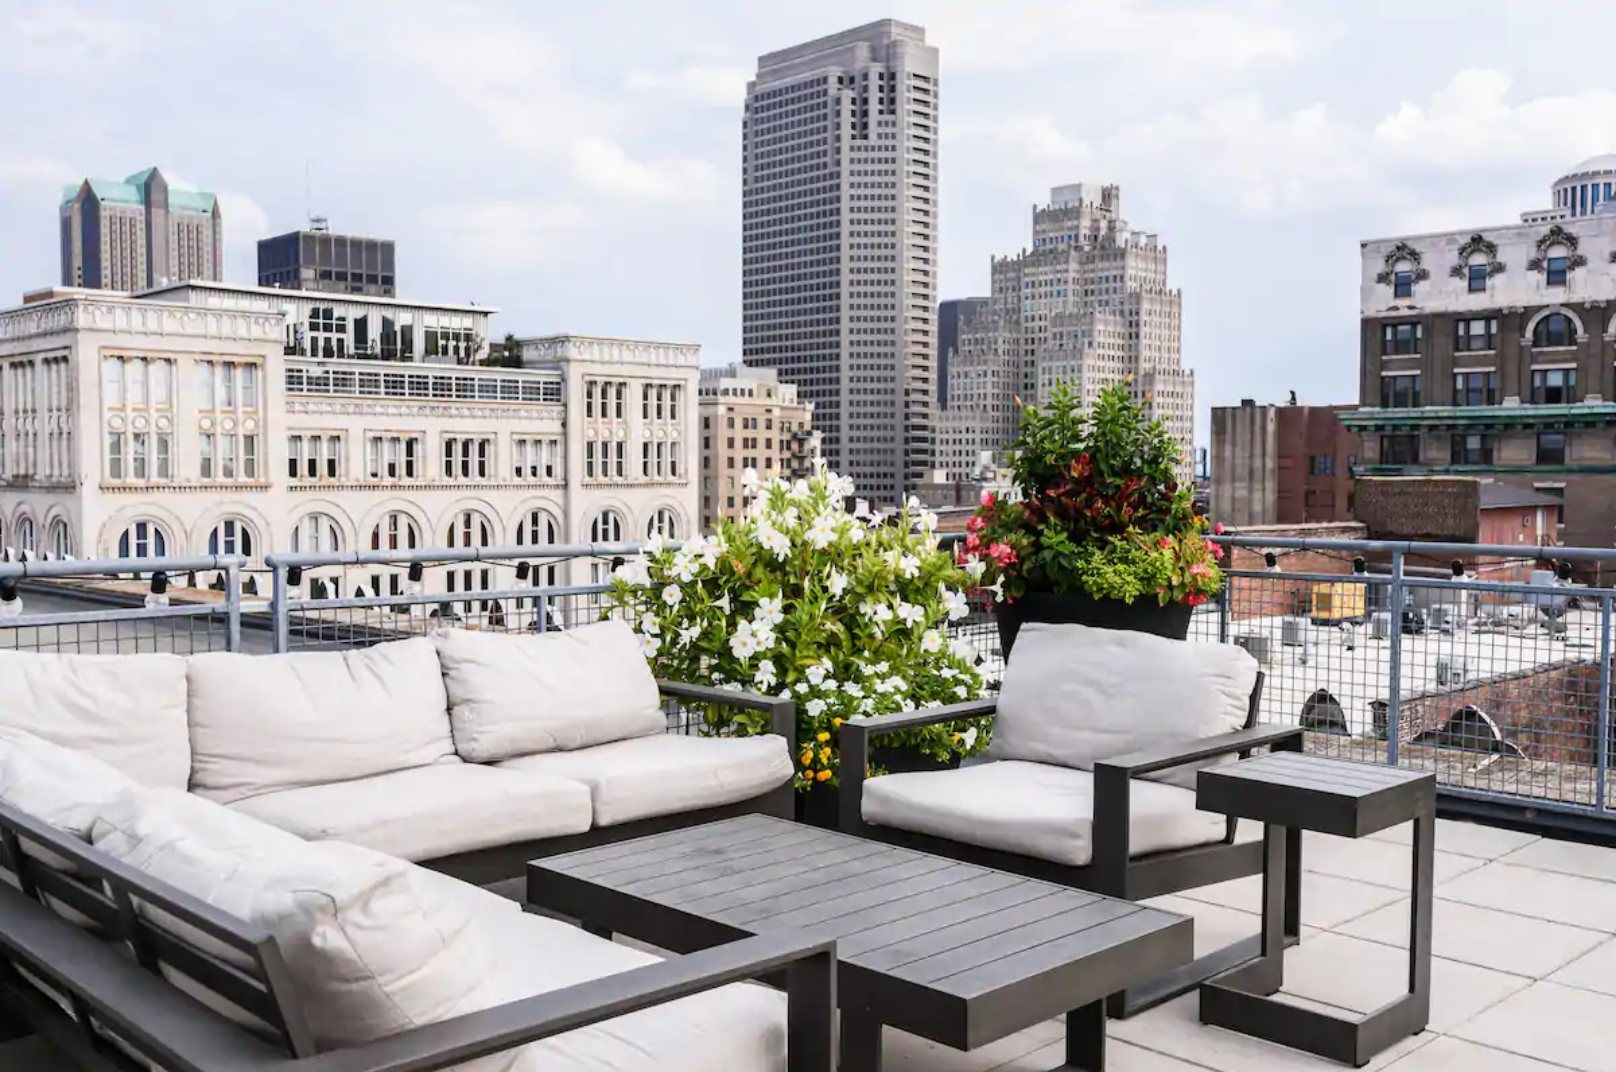 The Best Airbnbs in St. Louis